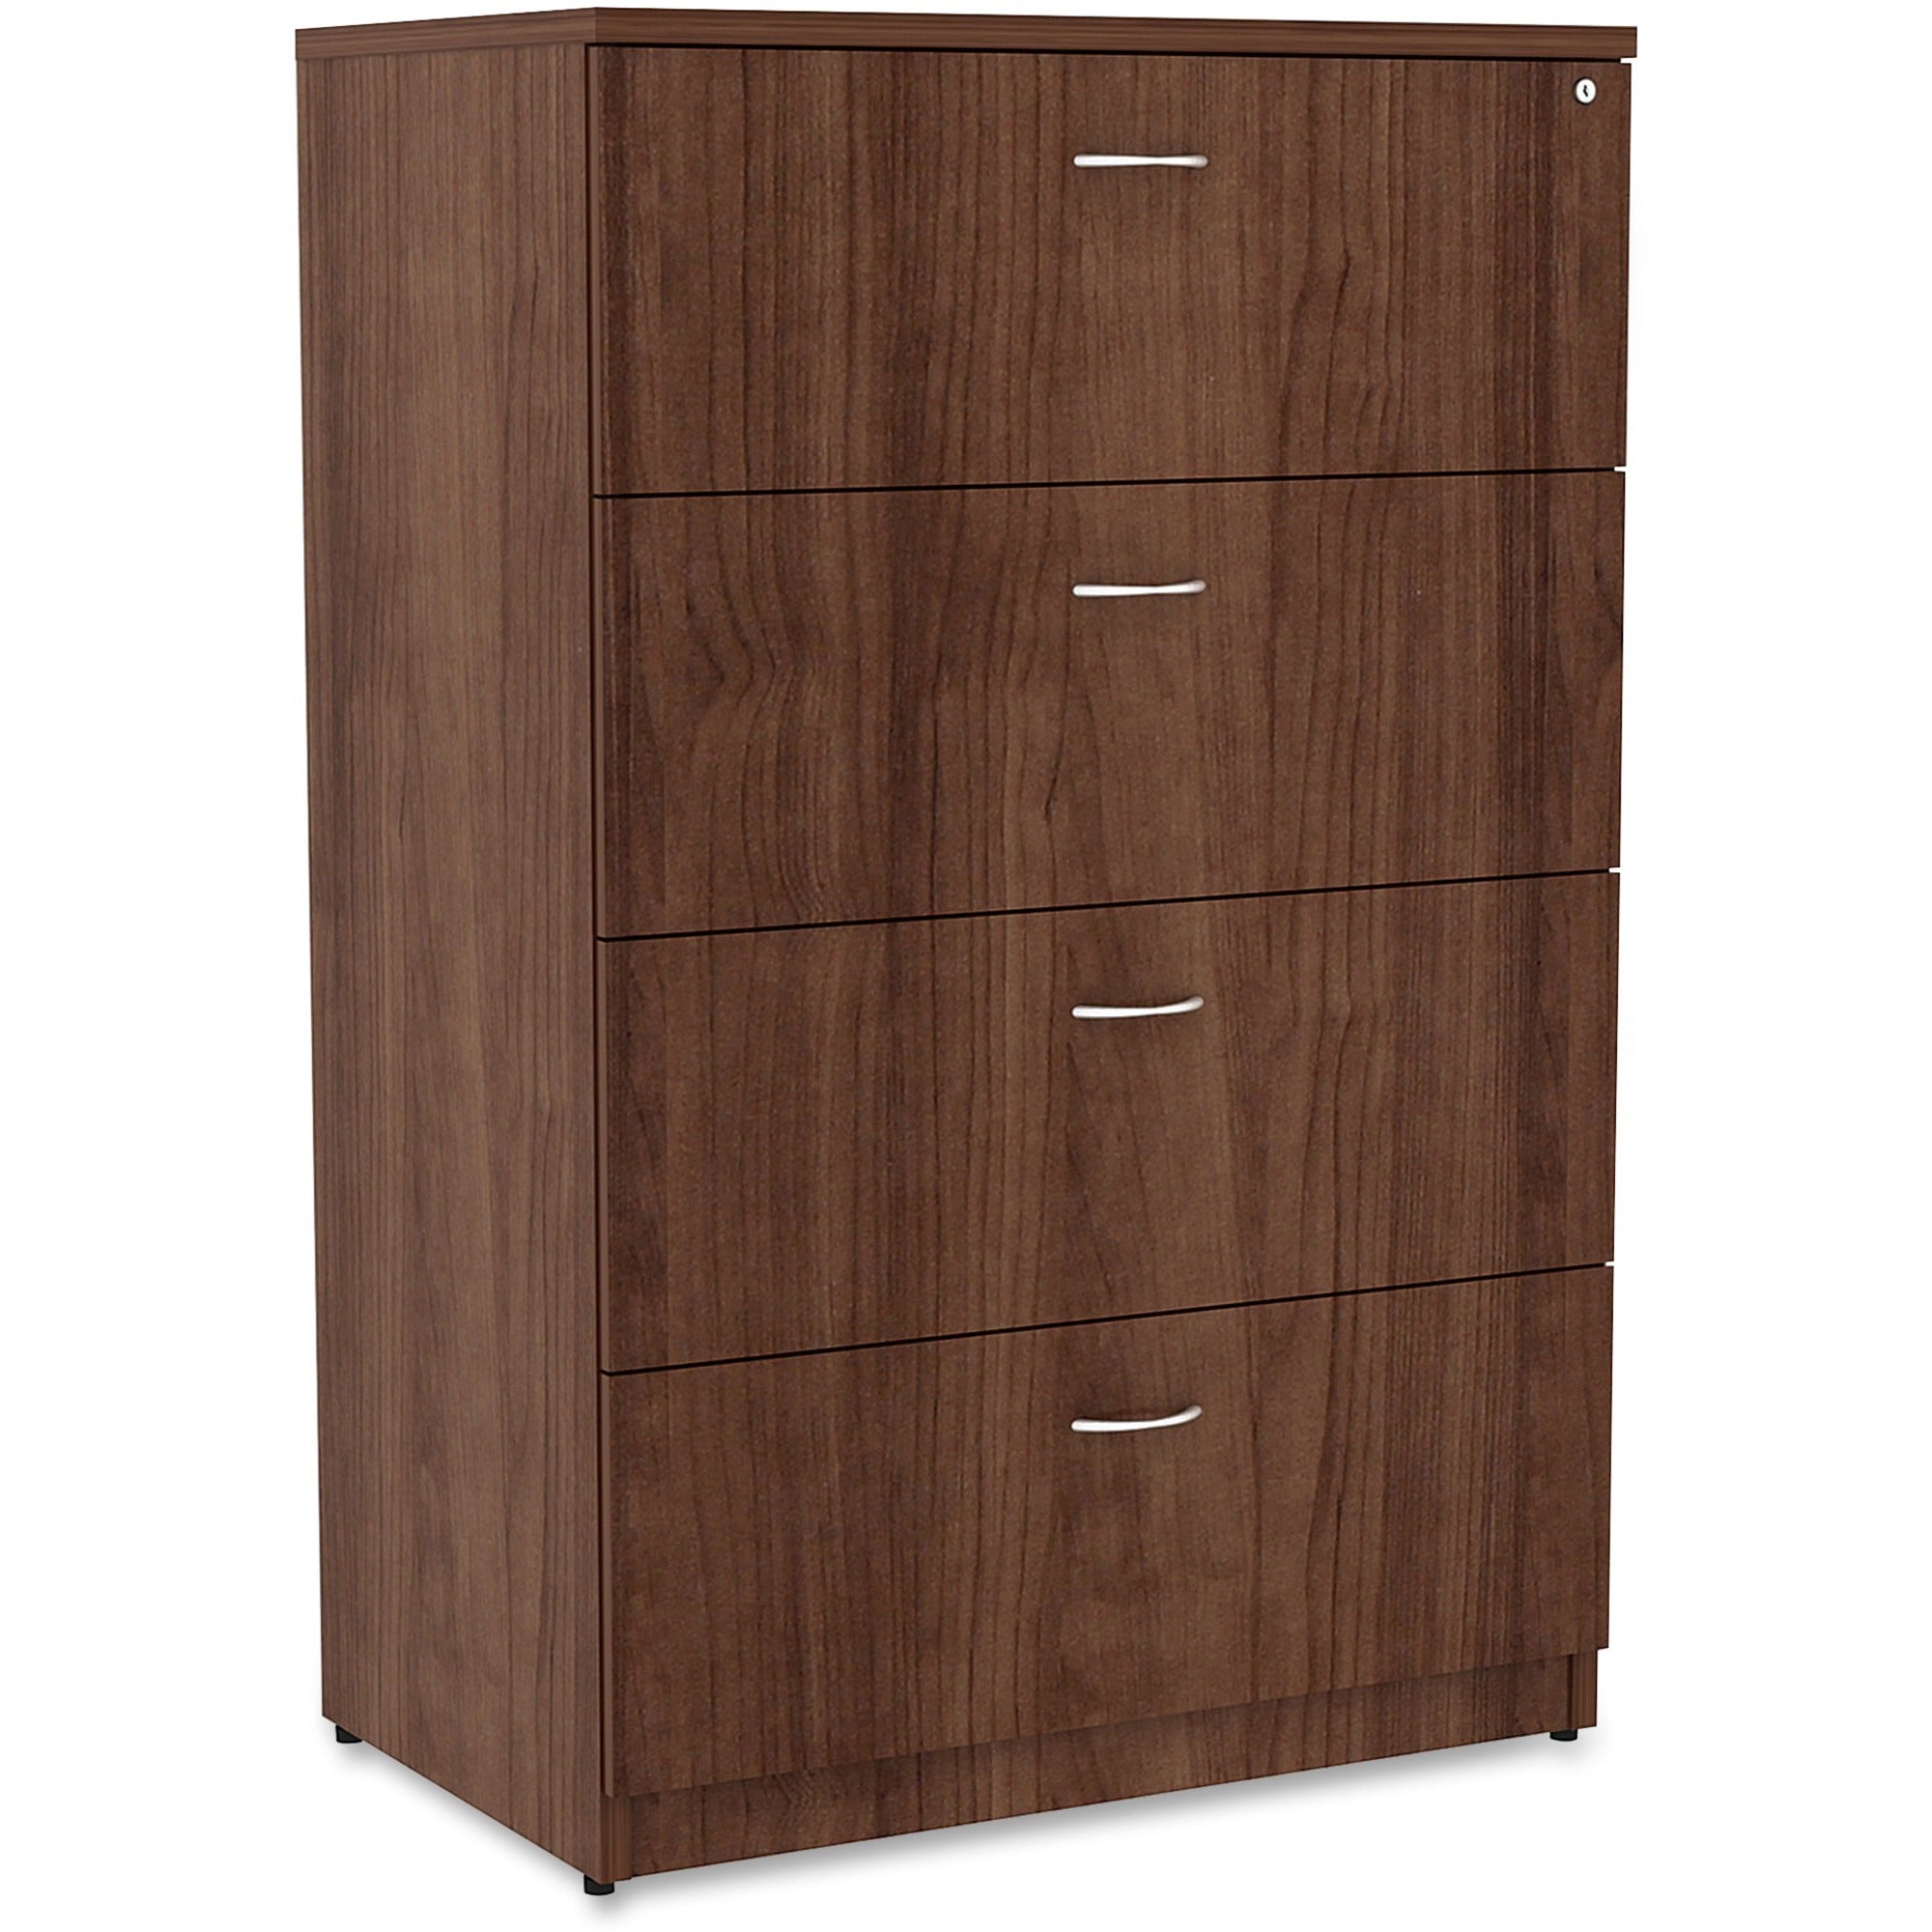 lorell-essentials-series-4-drawer-lateral-file-1-top-355-x-22548-4-x-file-drawers-finish-walnut-laminate_llr34388 - 1